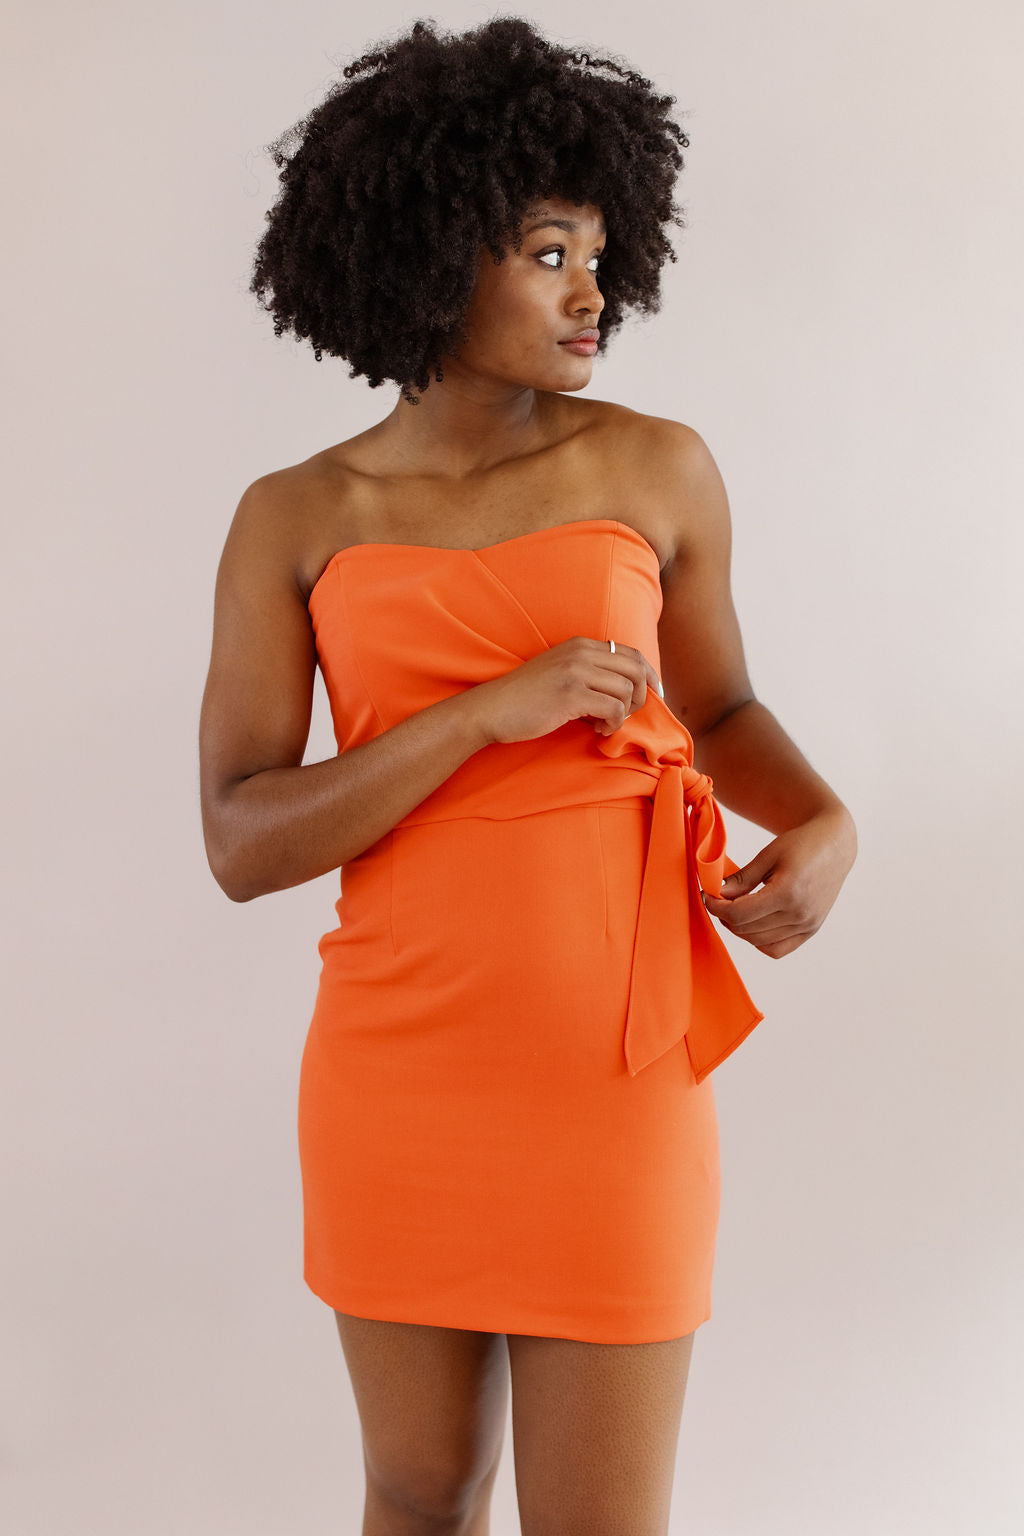 French Connection | Whisper Strapless Bow Dress | Neon Orange - Poppy and Stella